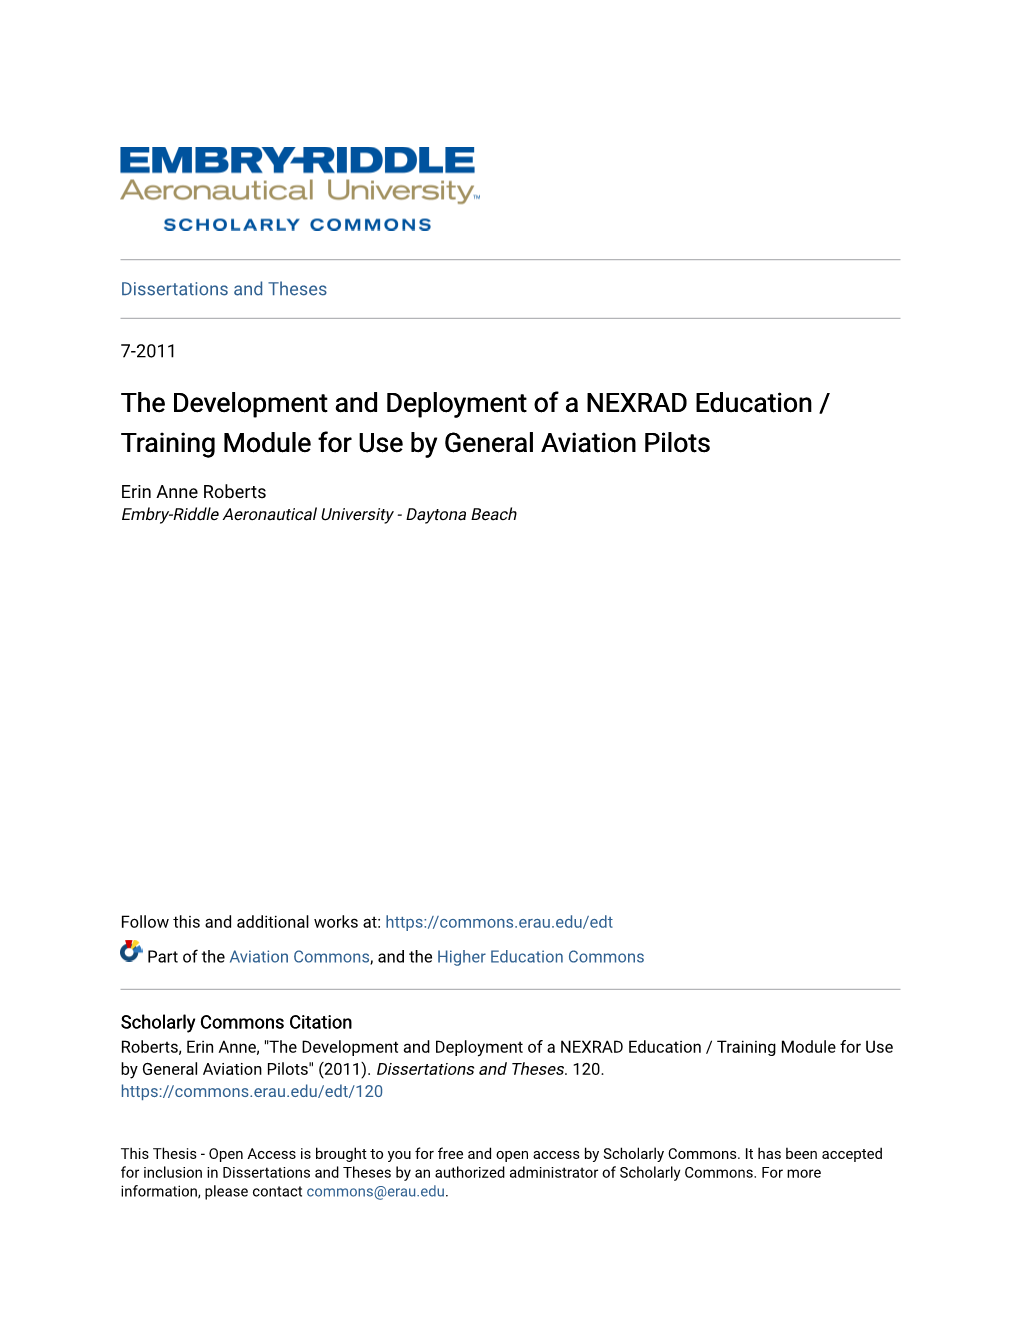 The Development and Deployment of a NEXRAD Education / Training Module for Use by General Aviation Pilots